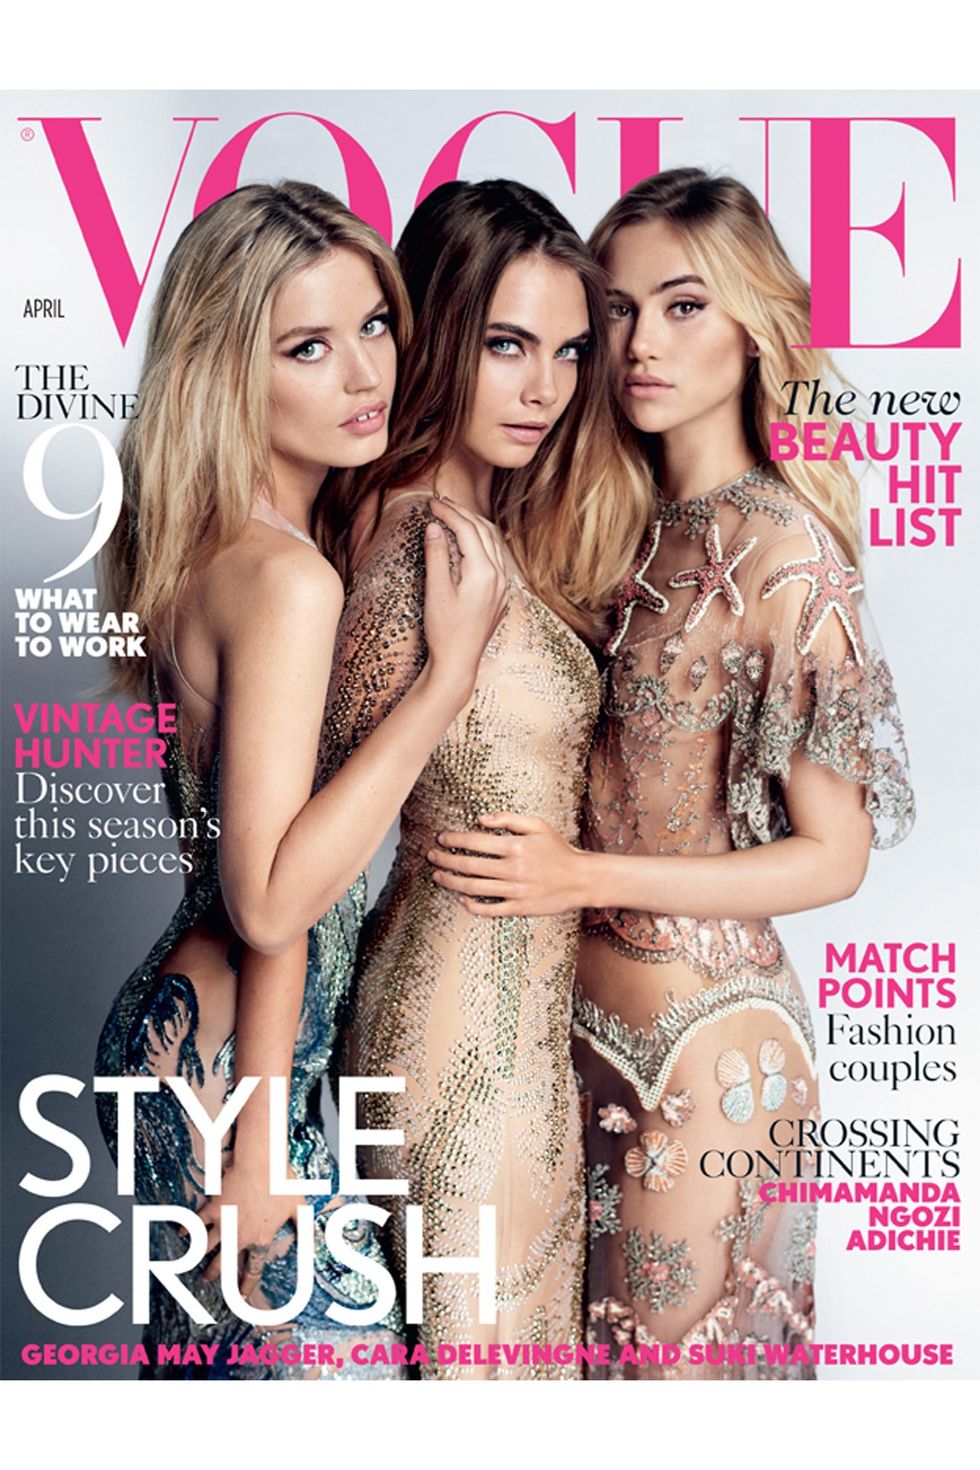 Cara Delevingne, Suki Waterhouse and Georgia May Jagger feature half-naked together in this month's Vogue